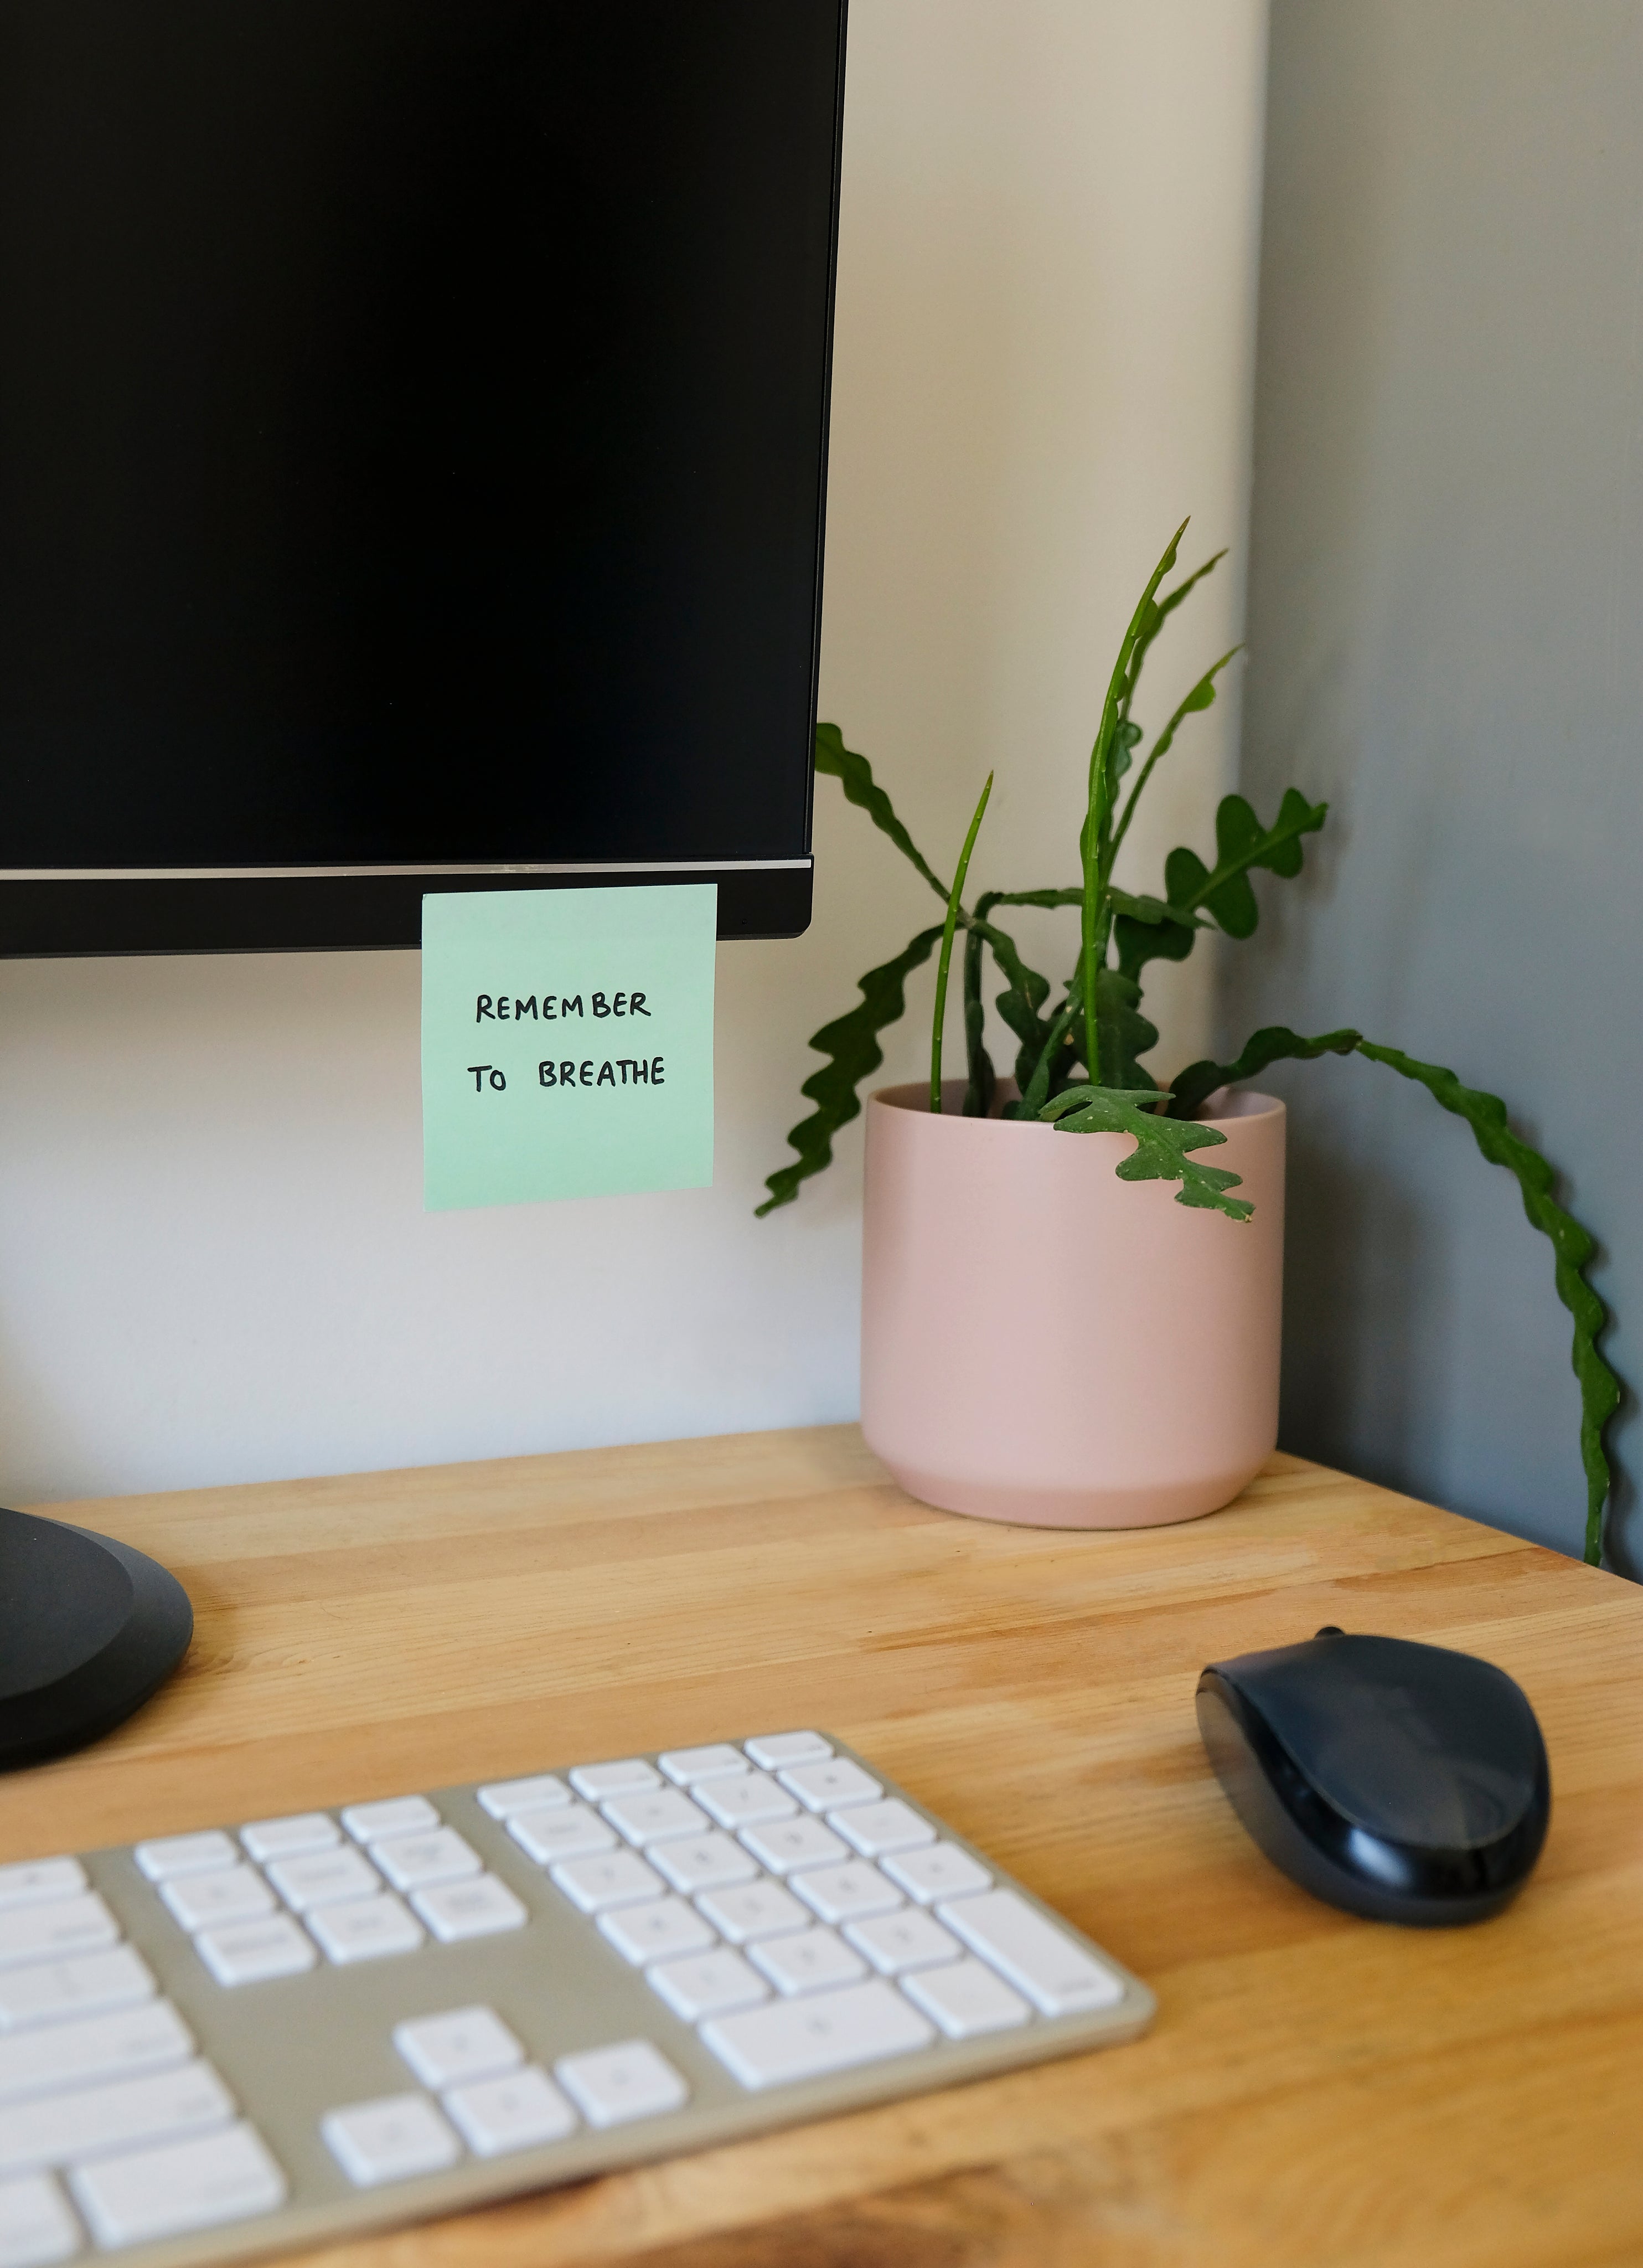 A post it note on a computer screen on a desk with a plant in the background. The post it note read "remember to breathe".